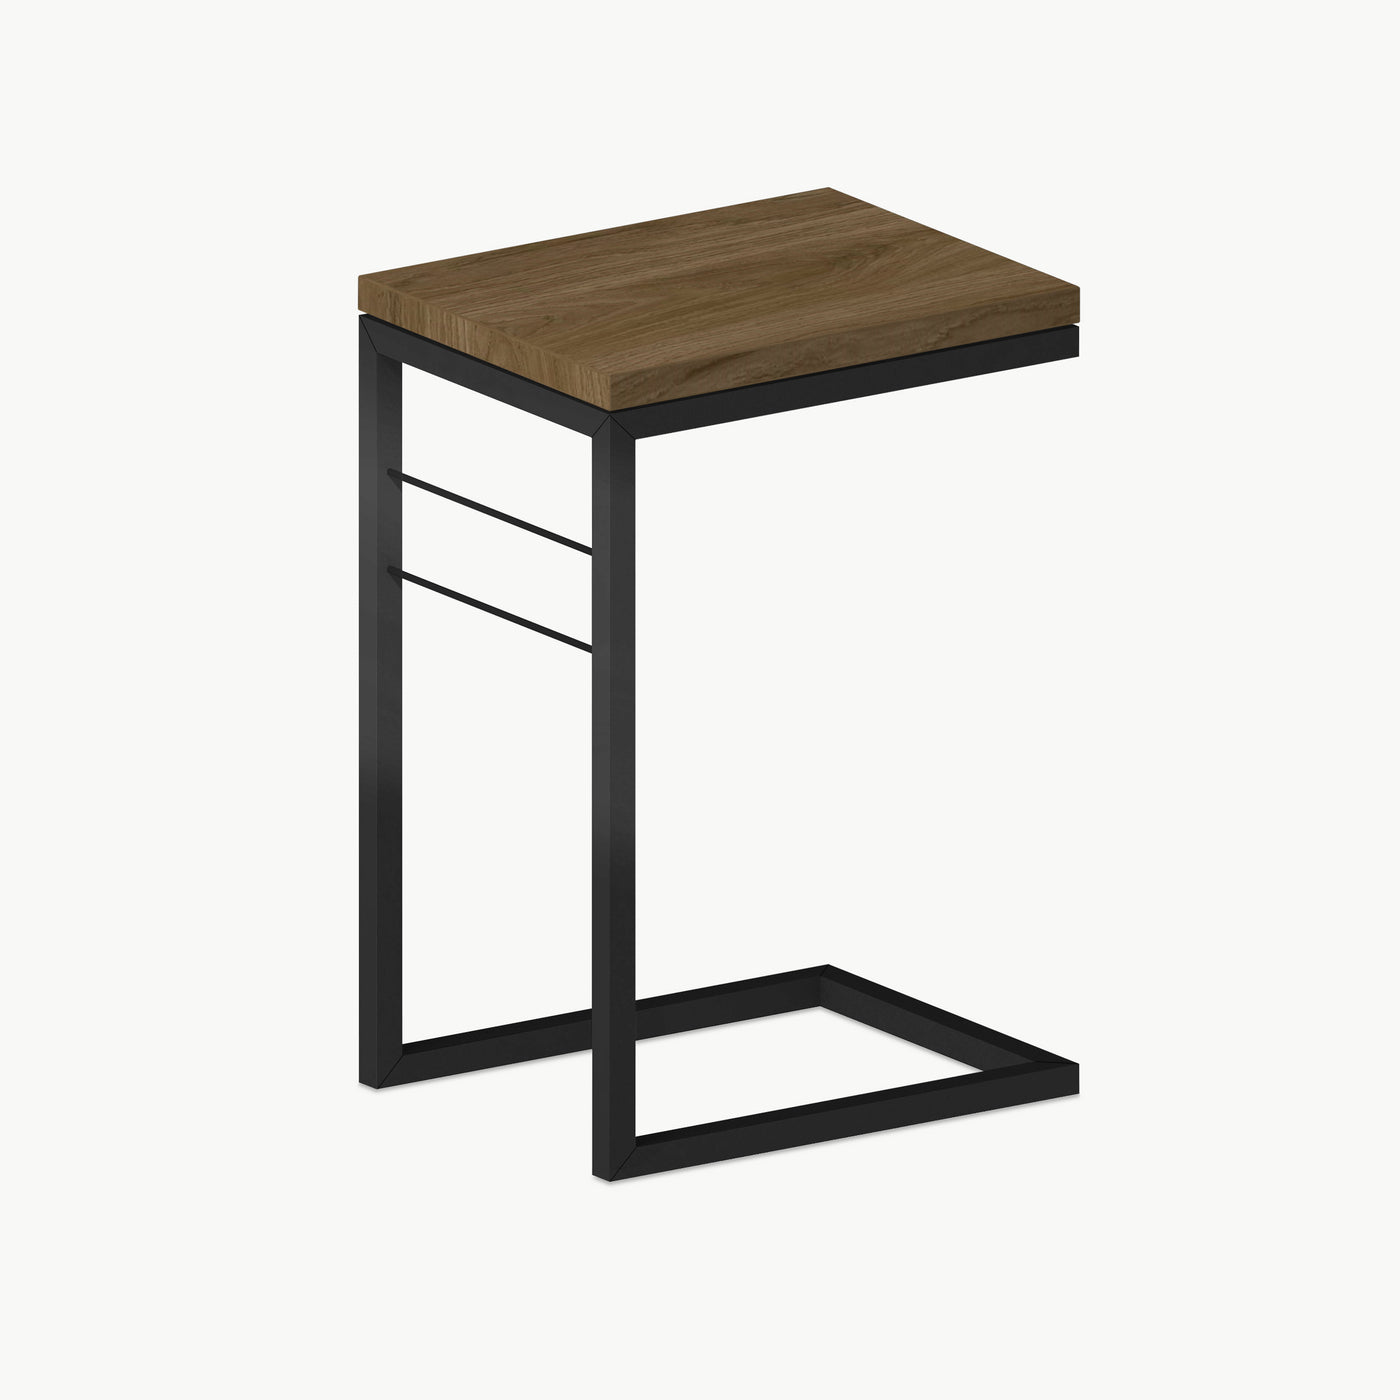 JING C Side Table - Solid Wood